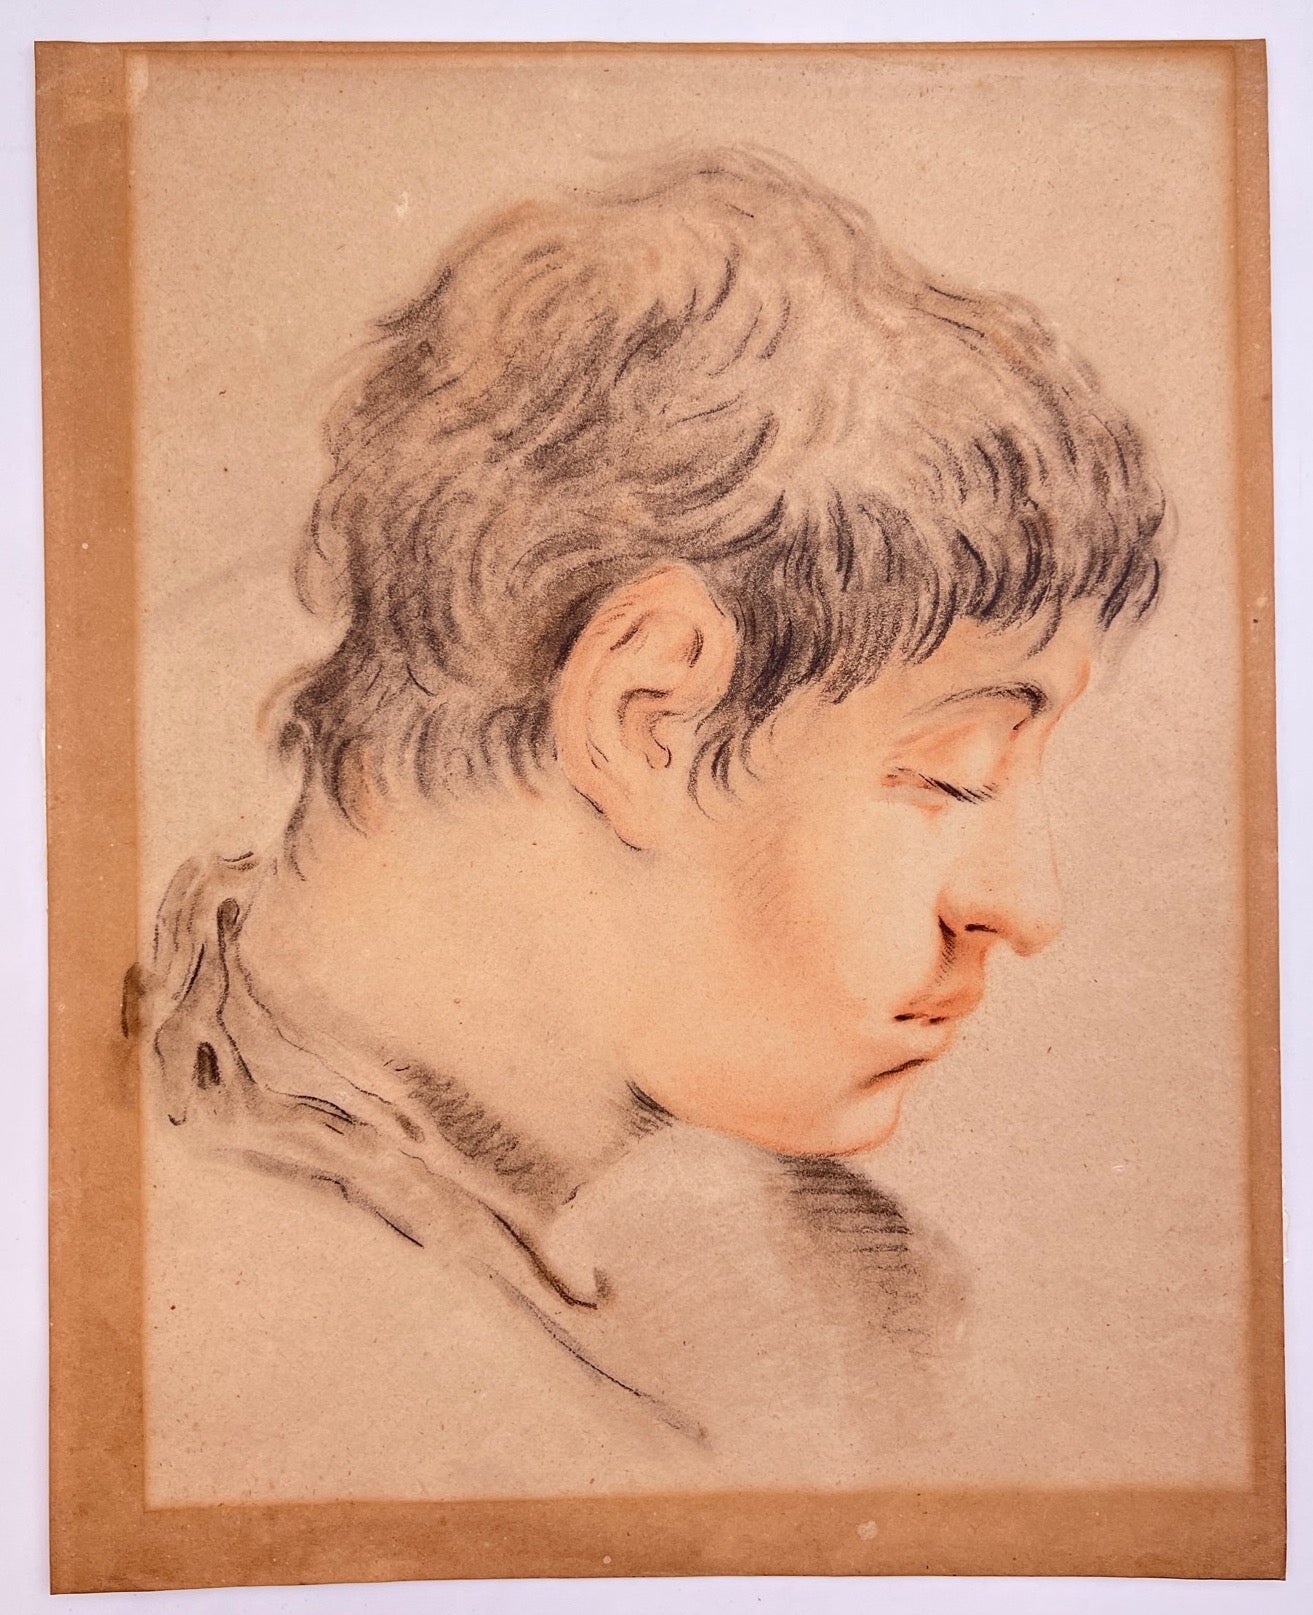 Antique Drawing - Portrait of a Young Man - Carbon/Sepia - 20th Century - Italy